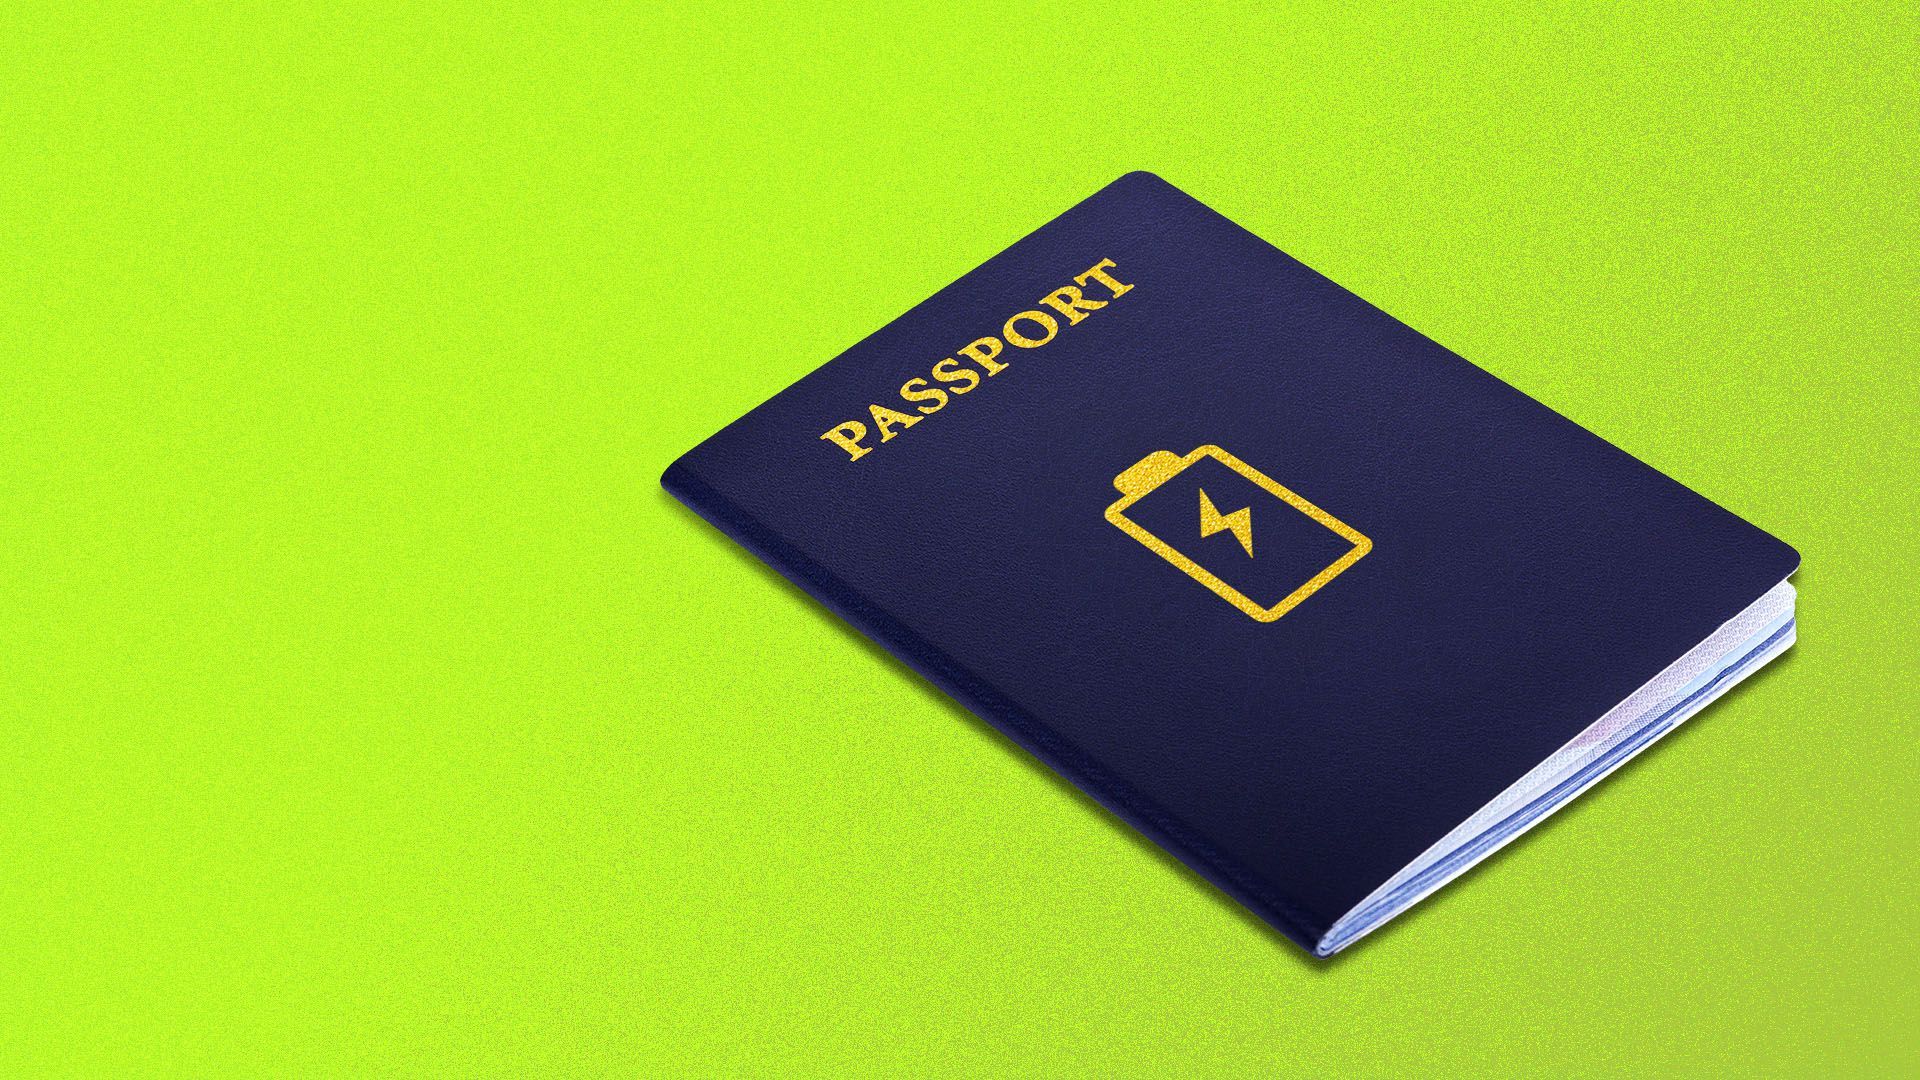 Illustration of a passport with a battery on the front.